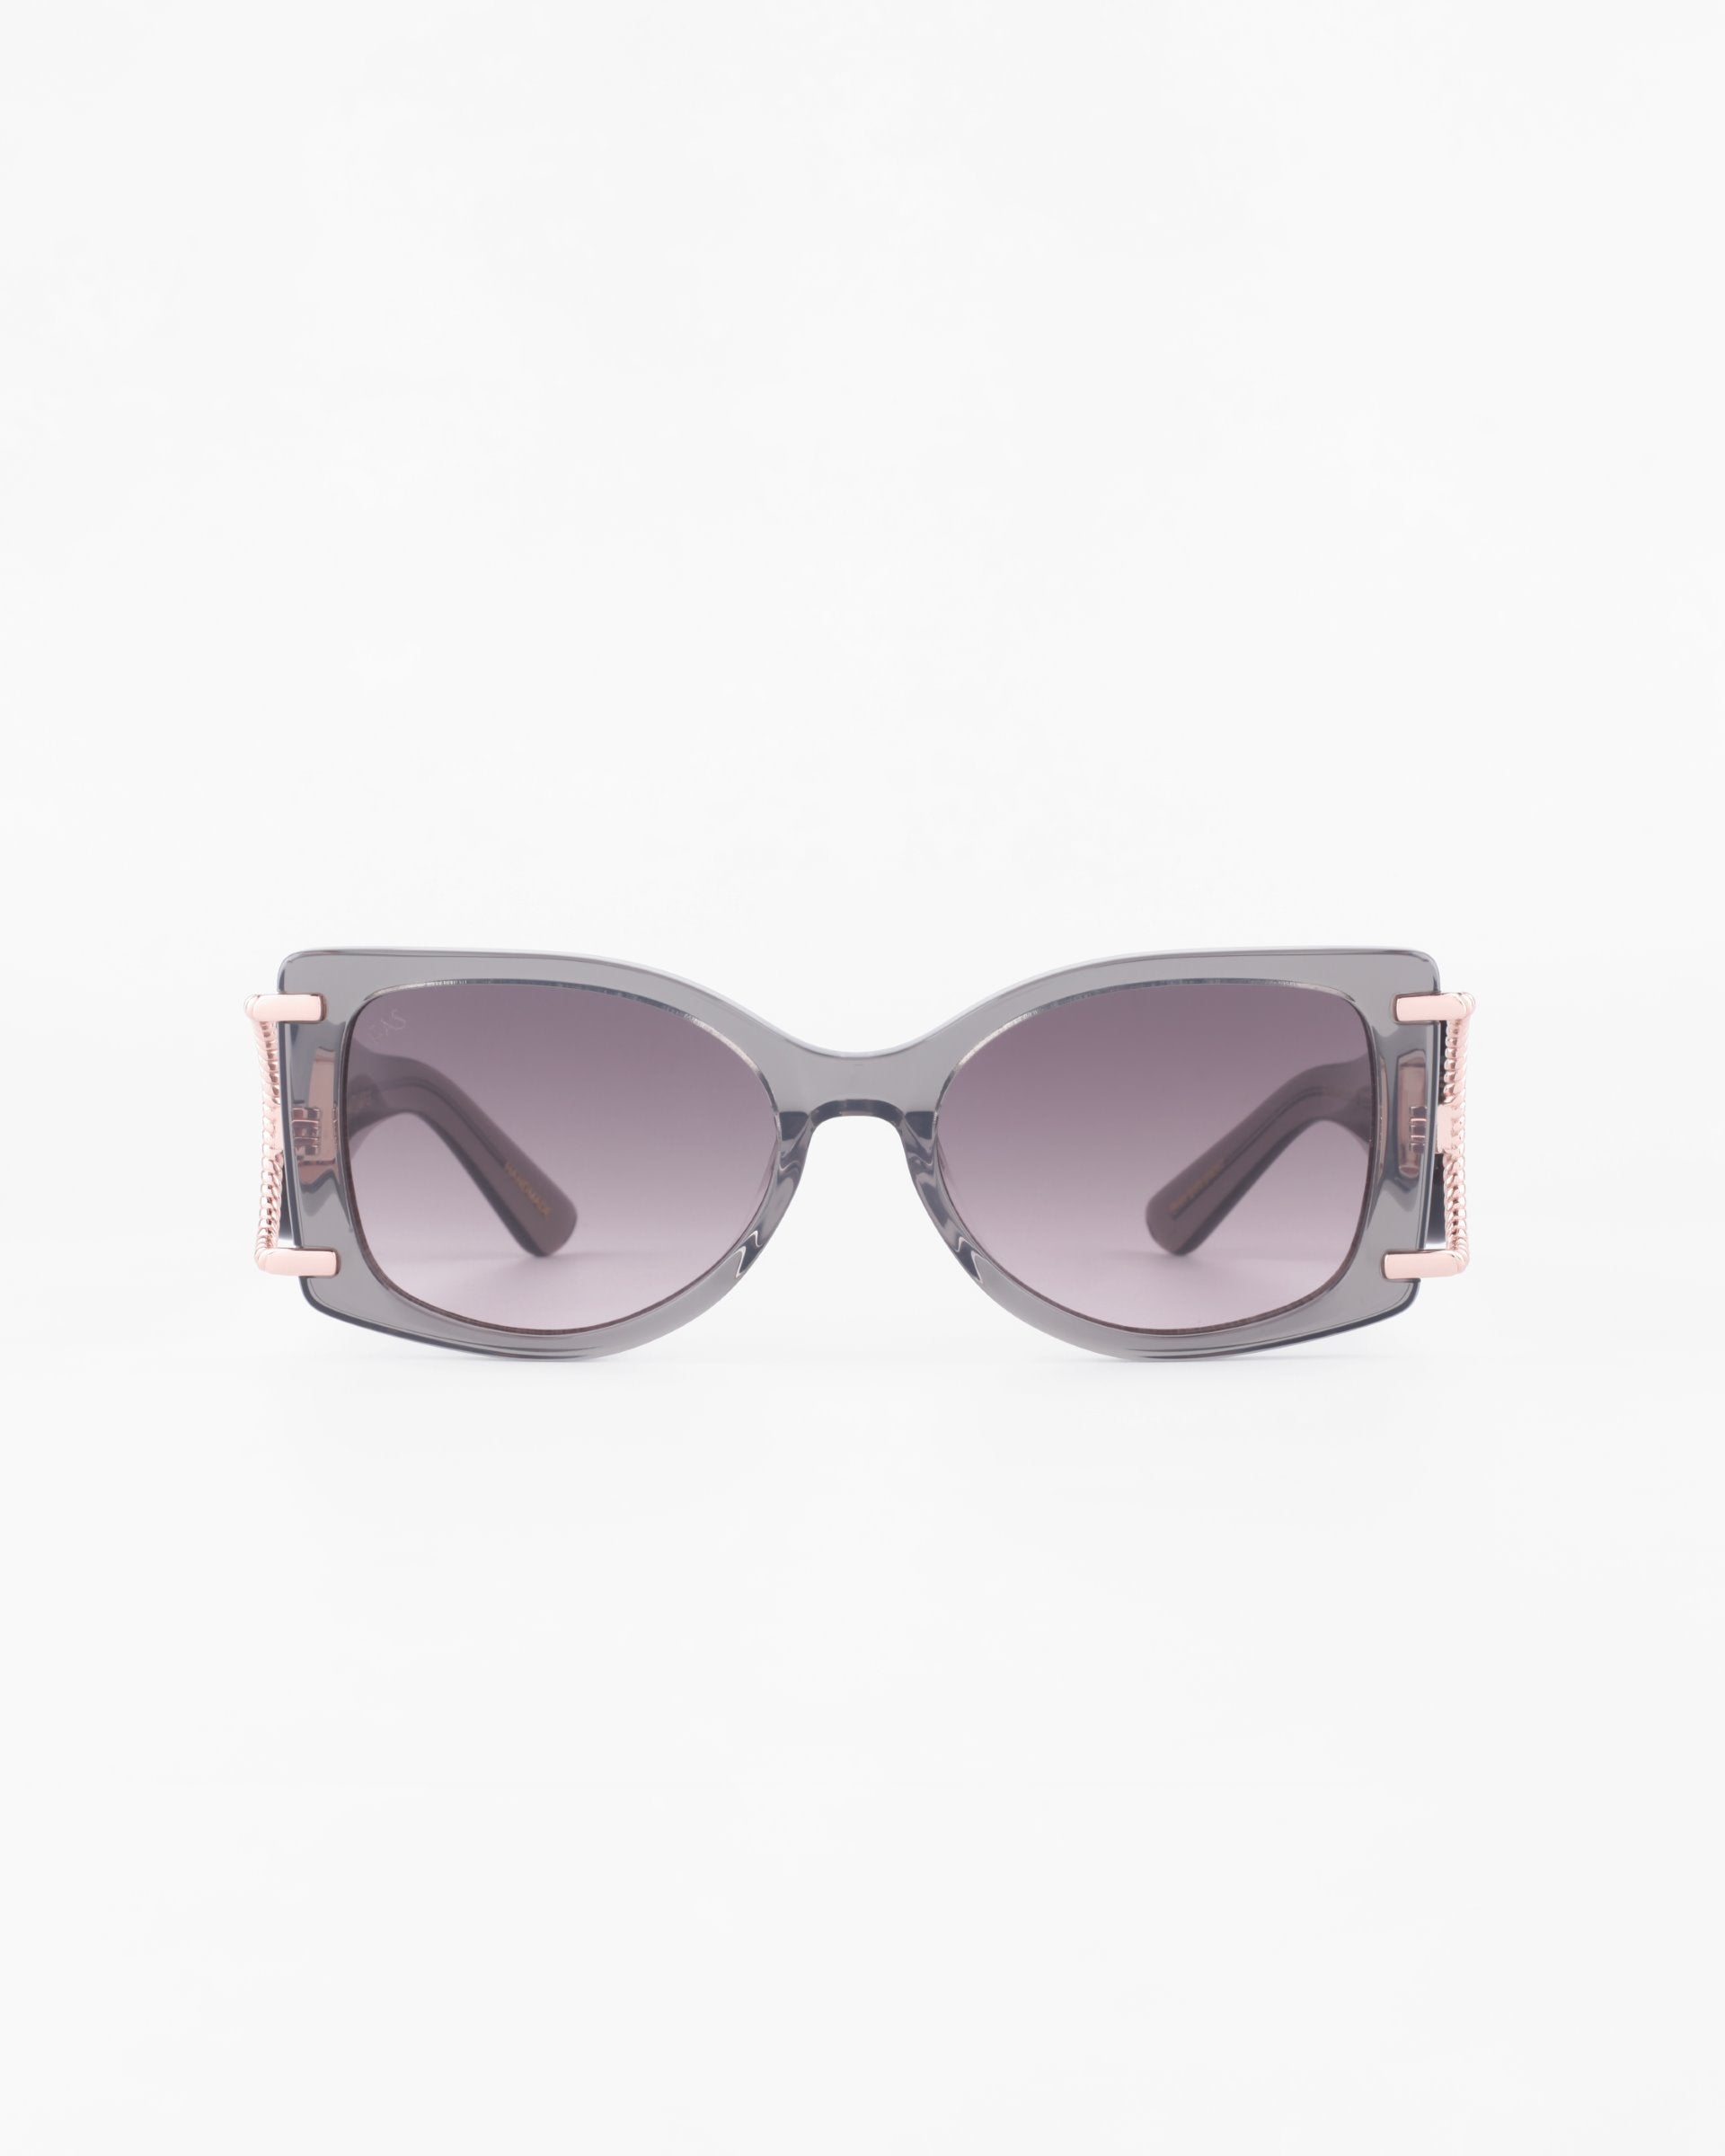 A pair of stylish, large, square-shaped acetate sunglasses with dark grey lenses and black frames. The sides of the frames feature an 18-karat gold-plated detail near the hinges, adding a touch of elegance to the design. These For Art's Sake® Sculpture sunglasses offer 100% UVA & UVB protection and are set against a plain white background.